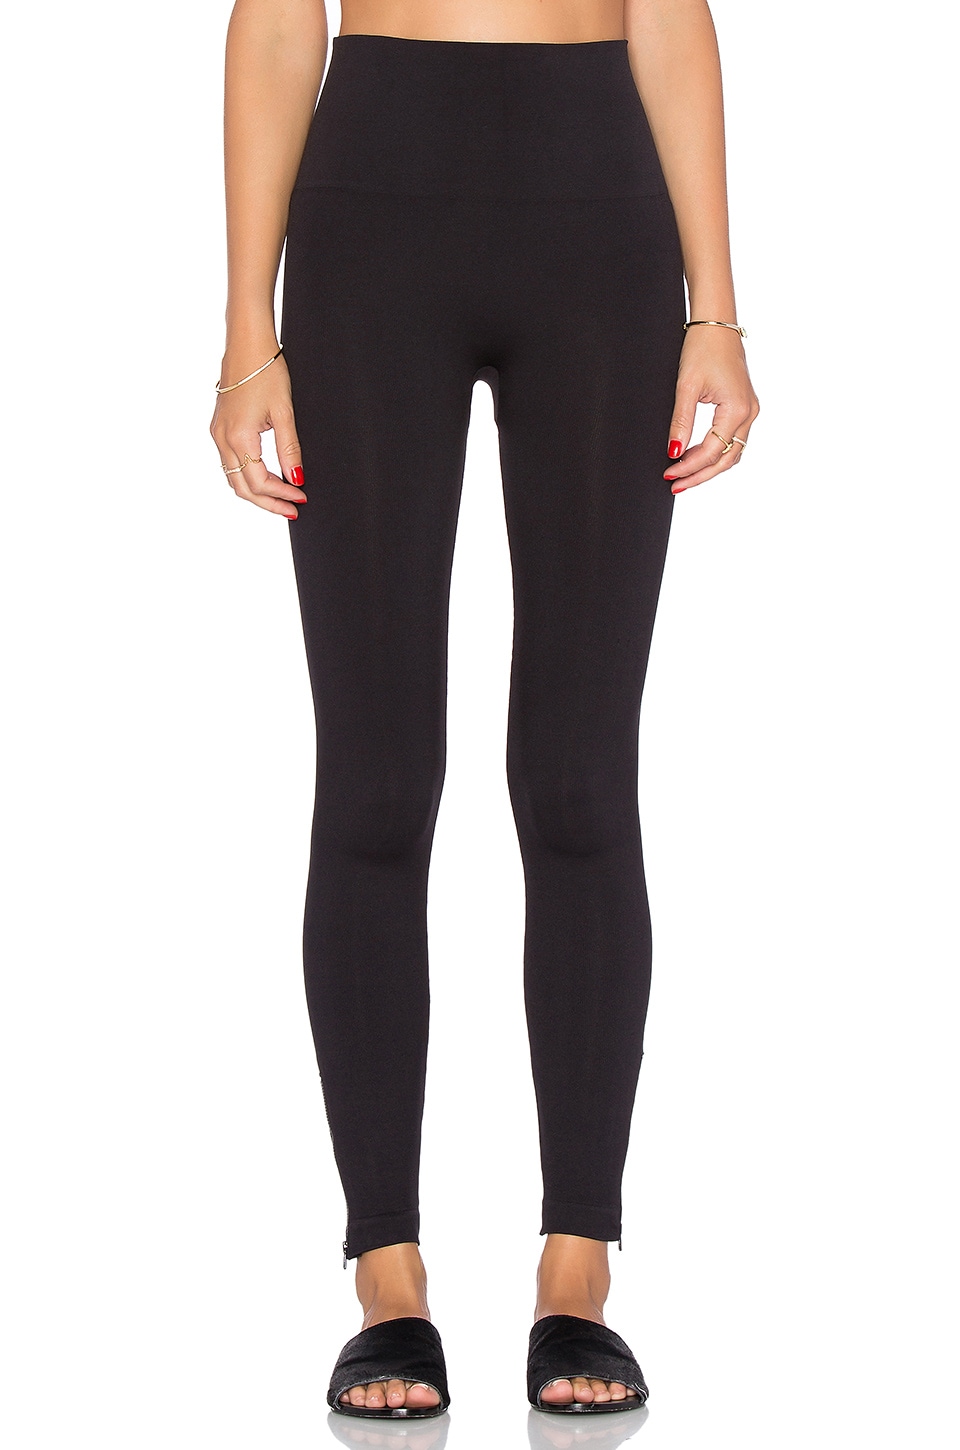 SPANX, Pants & Jumpsuits, Spanx Side Zip Look At Me Now Seamless Legging  Black Gold Zipper Xl